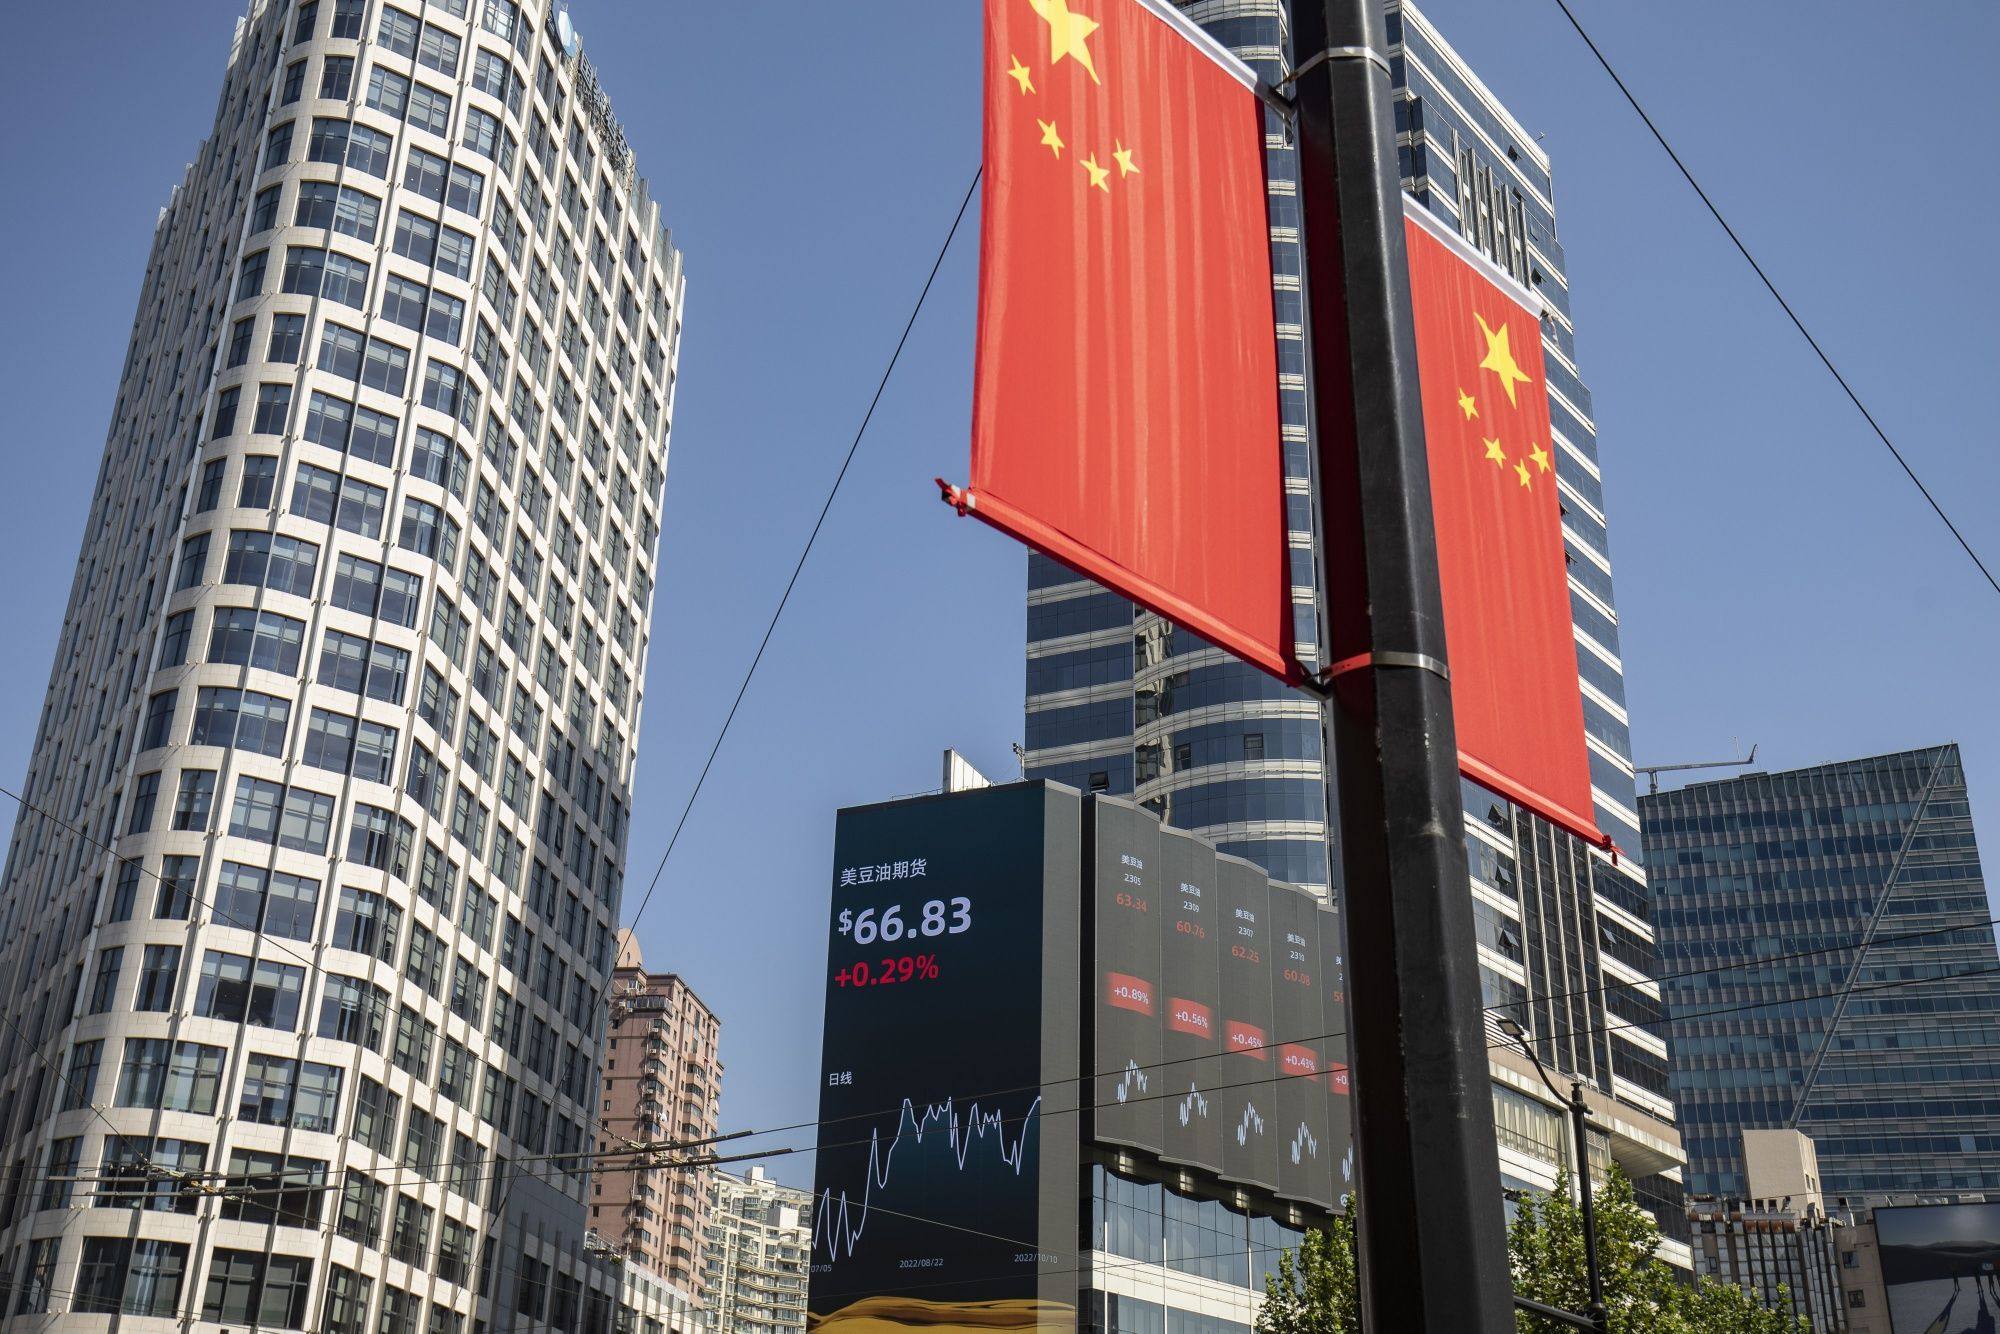 A public screen displays stock figures in Shanghai in October 2022. Photo: Bloomberg